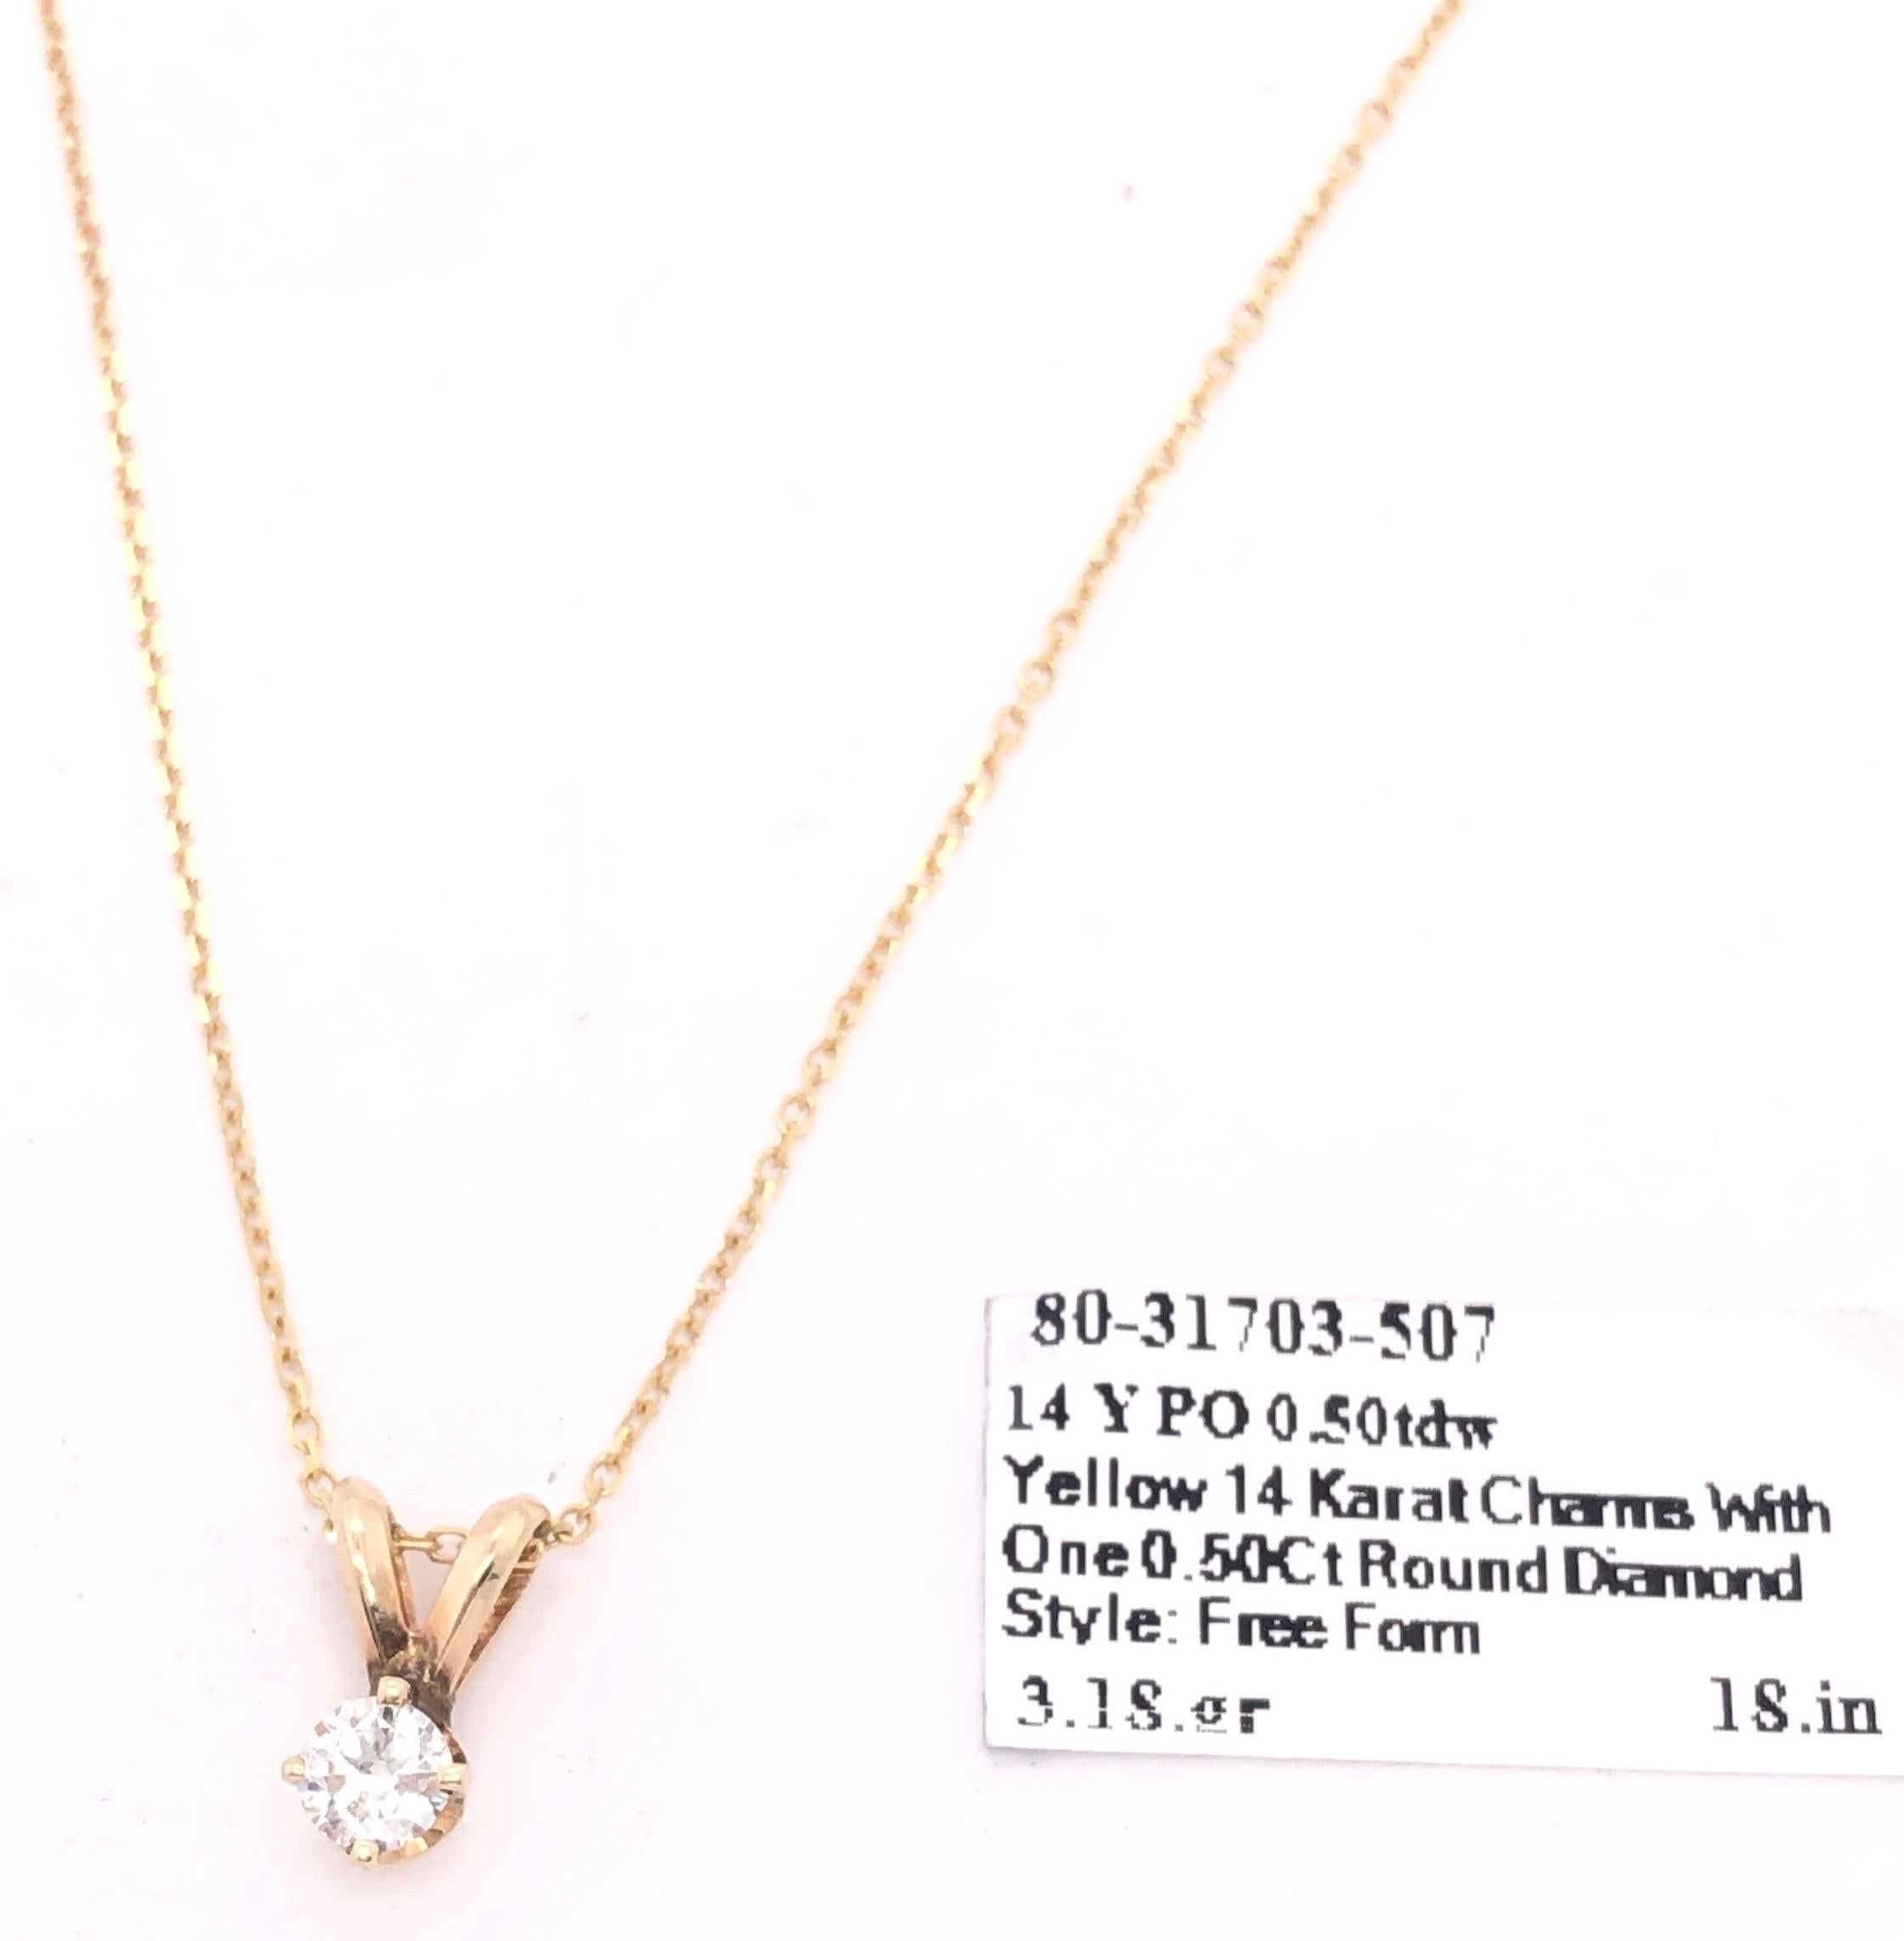 Modern 14 Karat Yellow Gold Necklace with Round Diamond Pendant For Sale